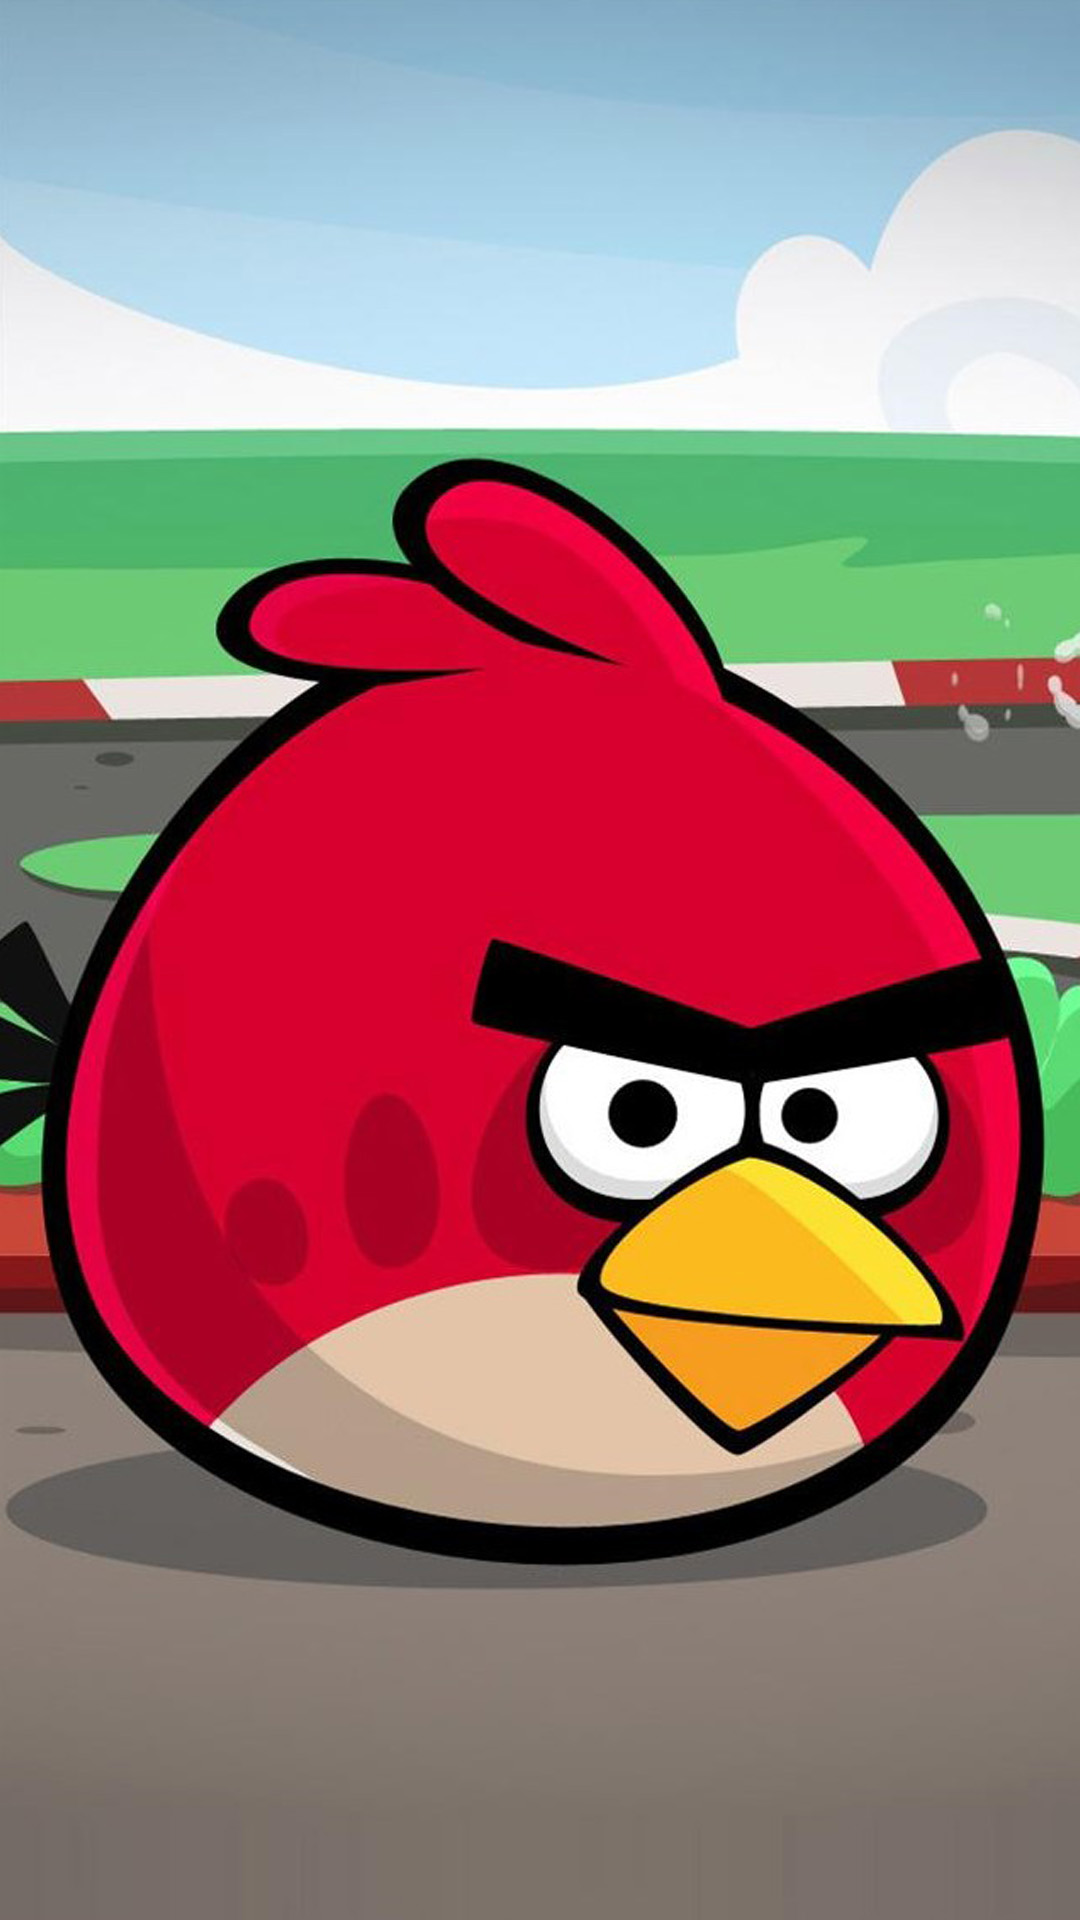 Angry Bird Red Art Android Wallpaper - Angry Birds Seasons Go Green Get Lucky - HD Wallpaper 